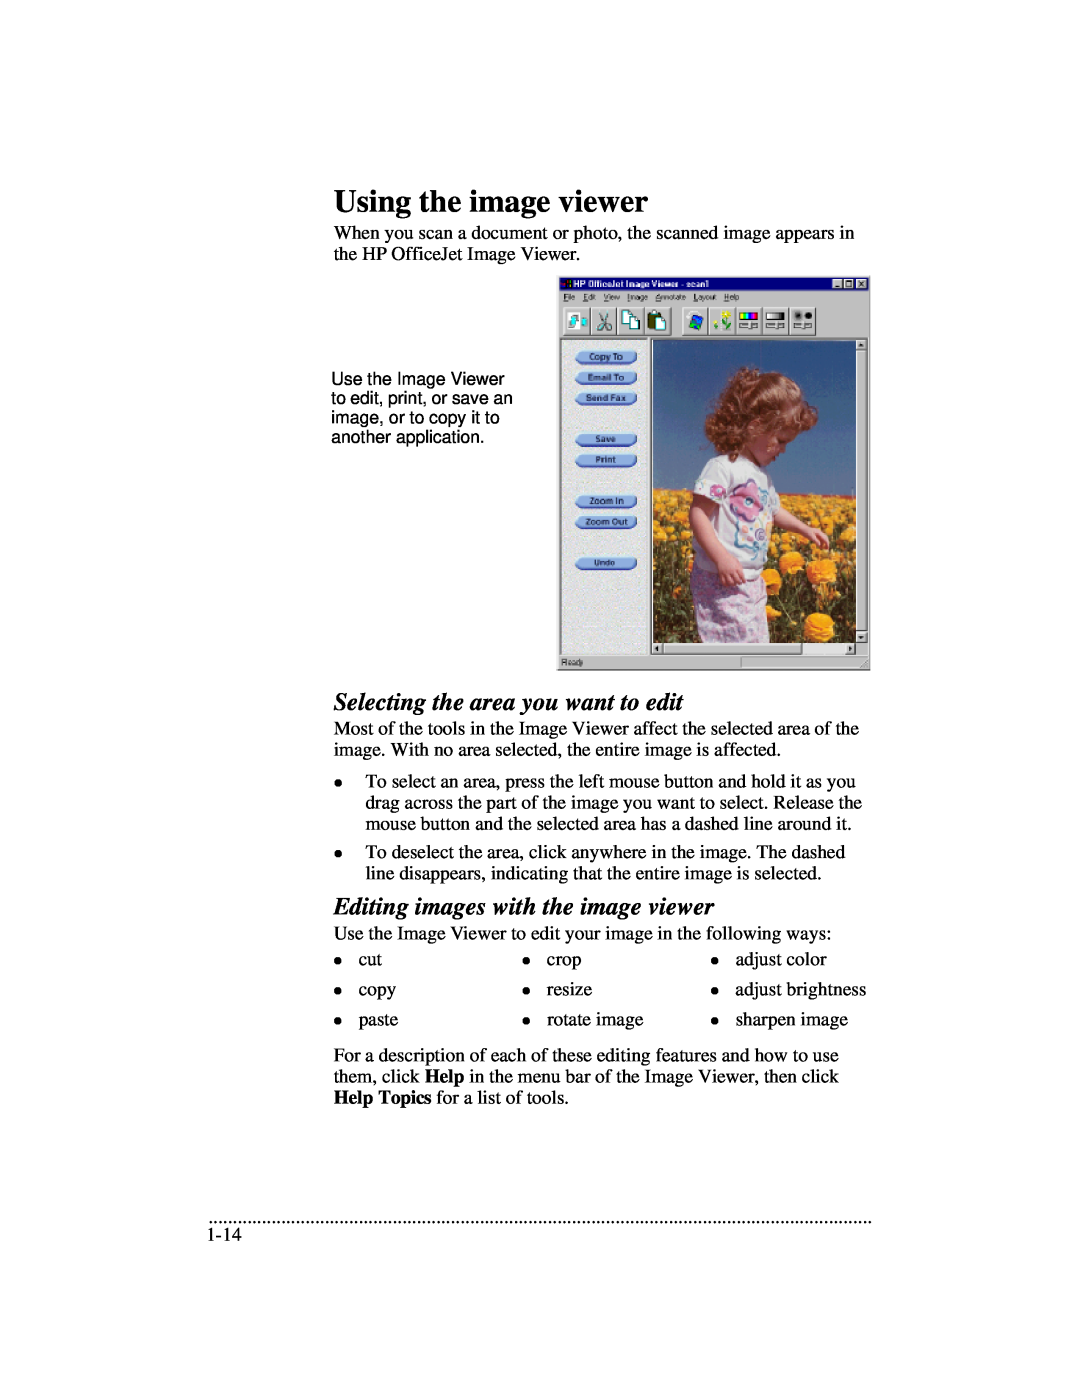 HP 700 manual Using the image viewer, Selecting the area you want to edit, Editing images with the image viewer 